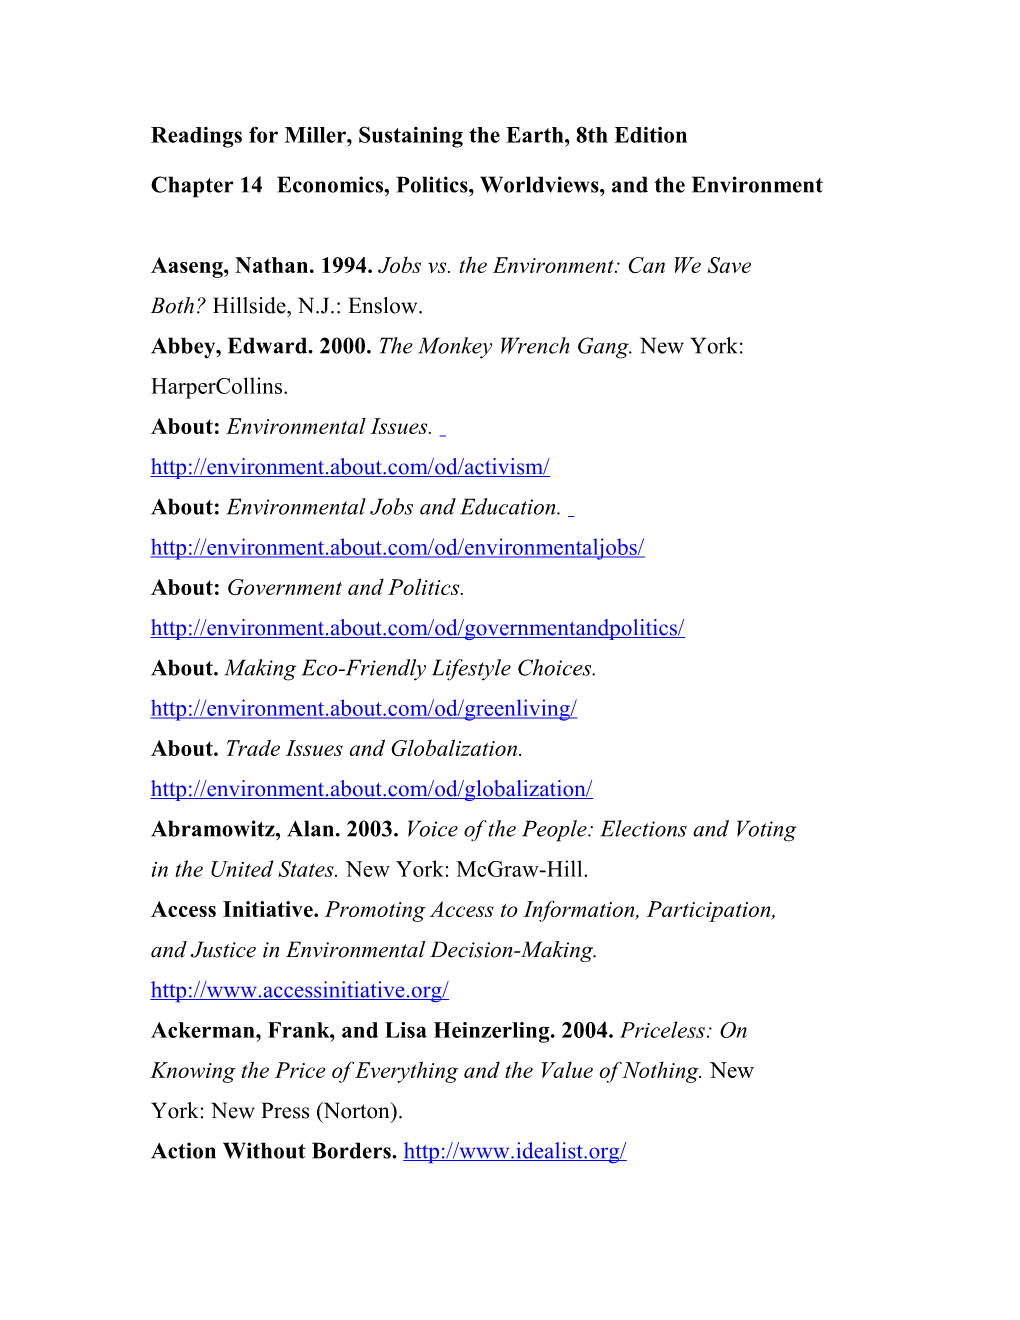 Readings for Miller, Sustaining the Earth, 8Th Edition s1